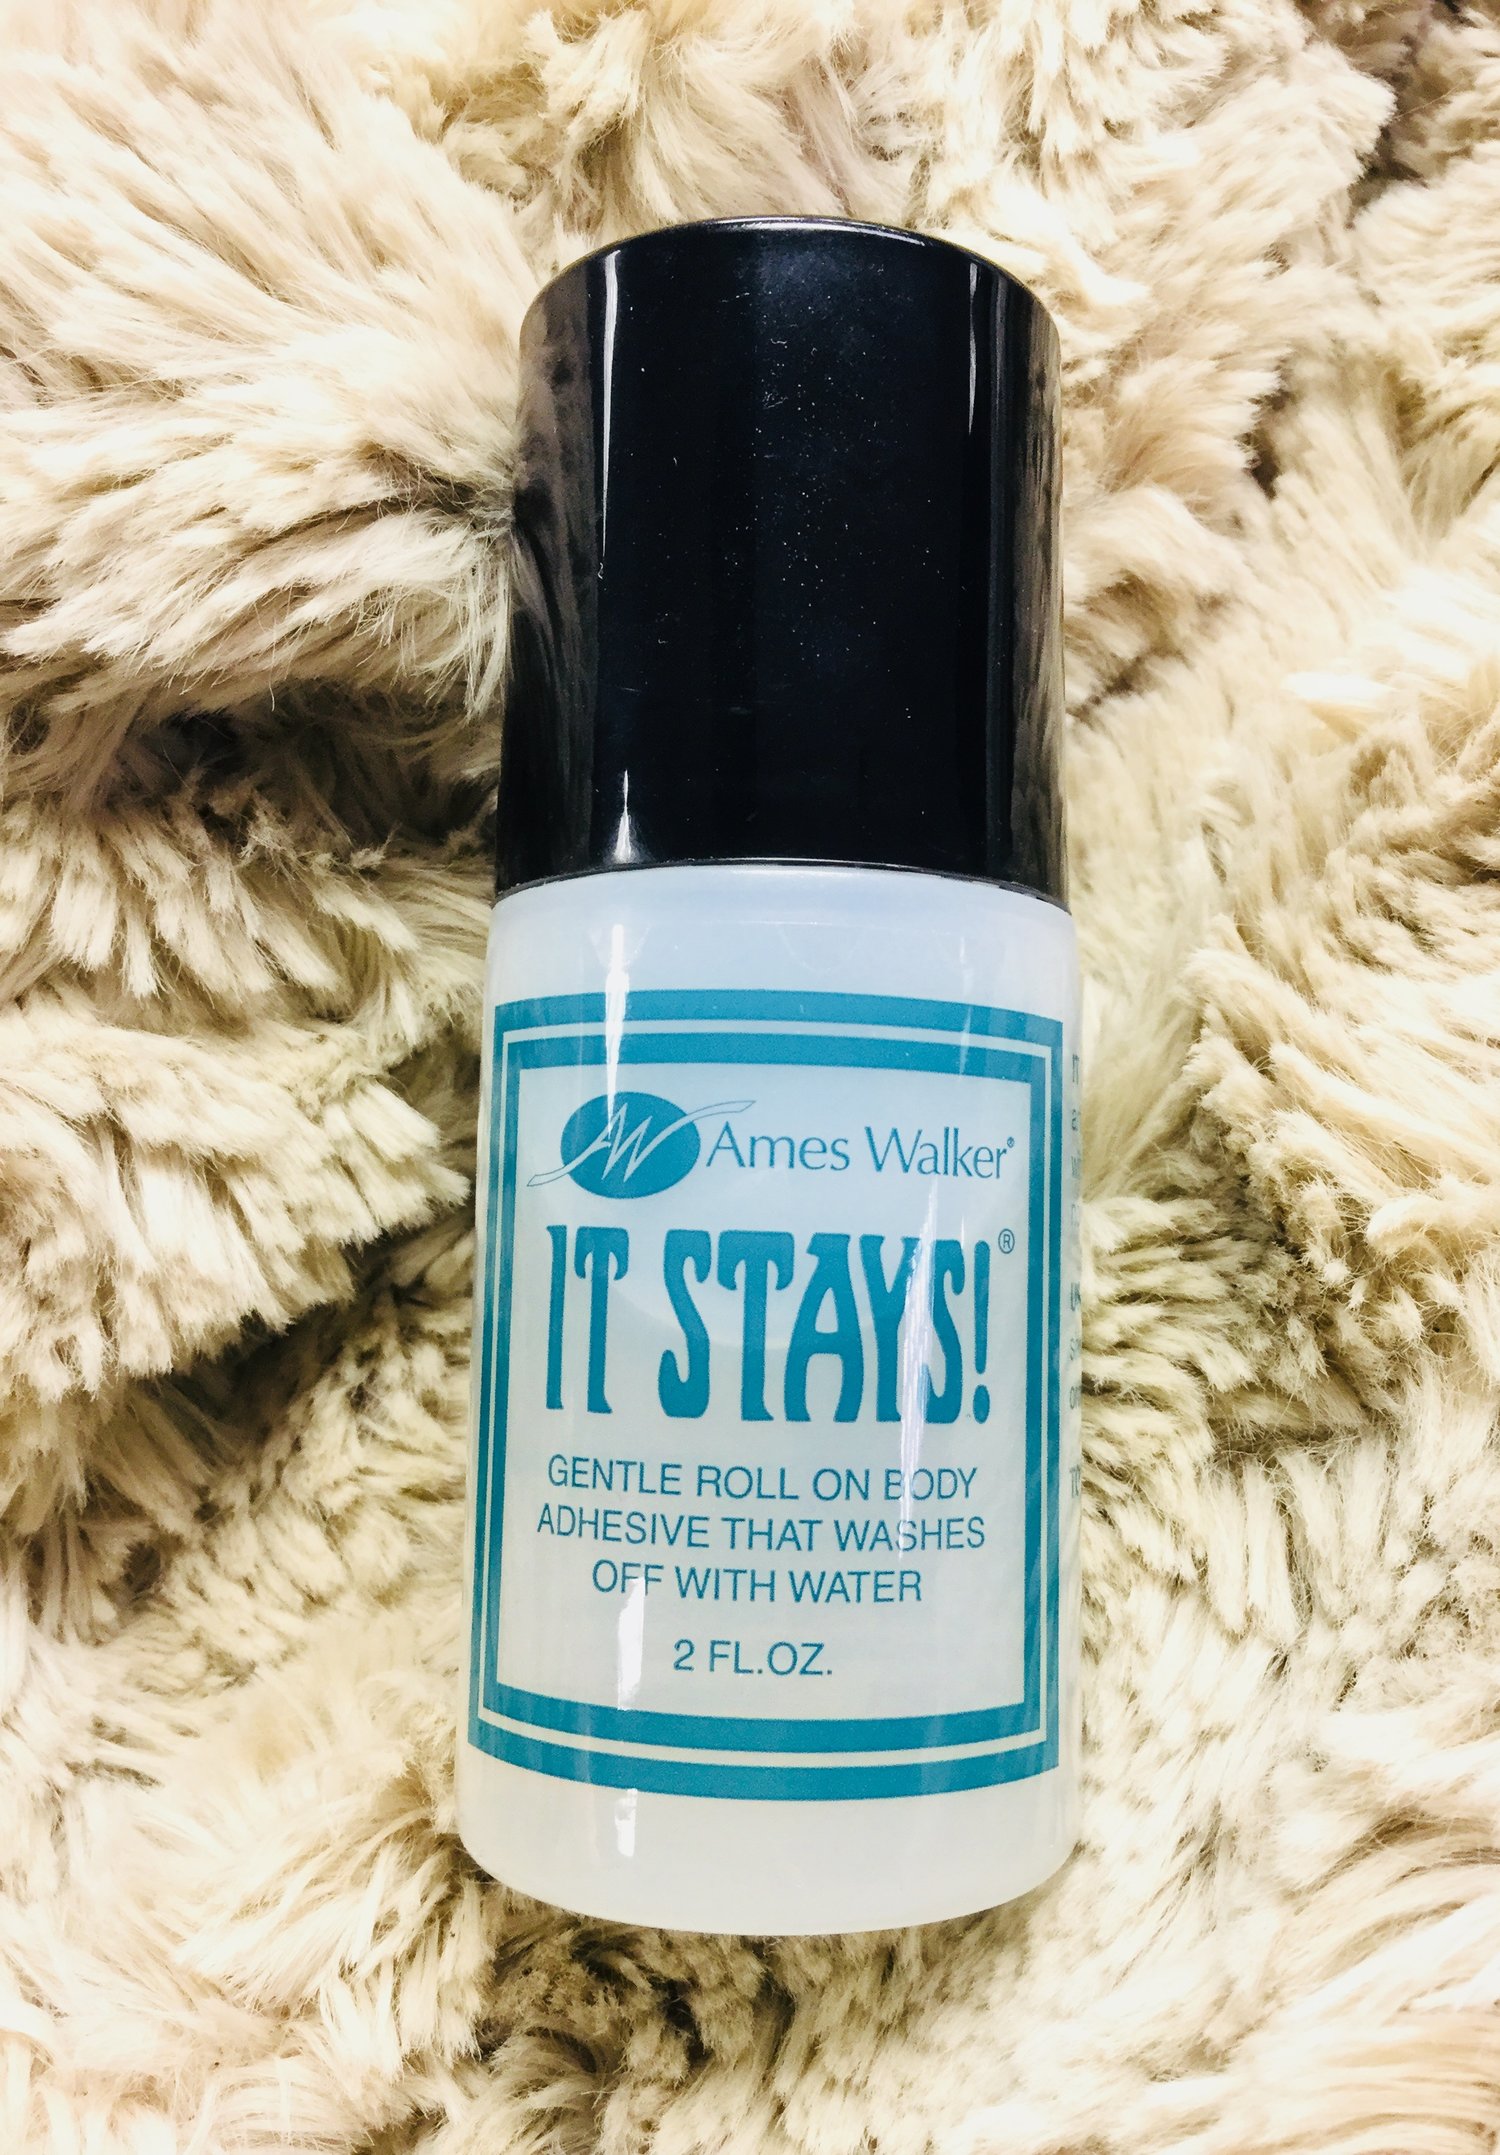 Ames Walker It Stays! Body Adhesive